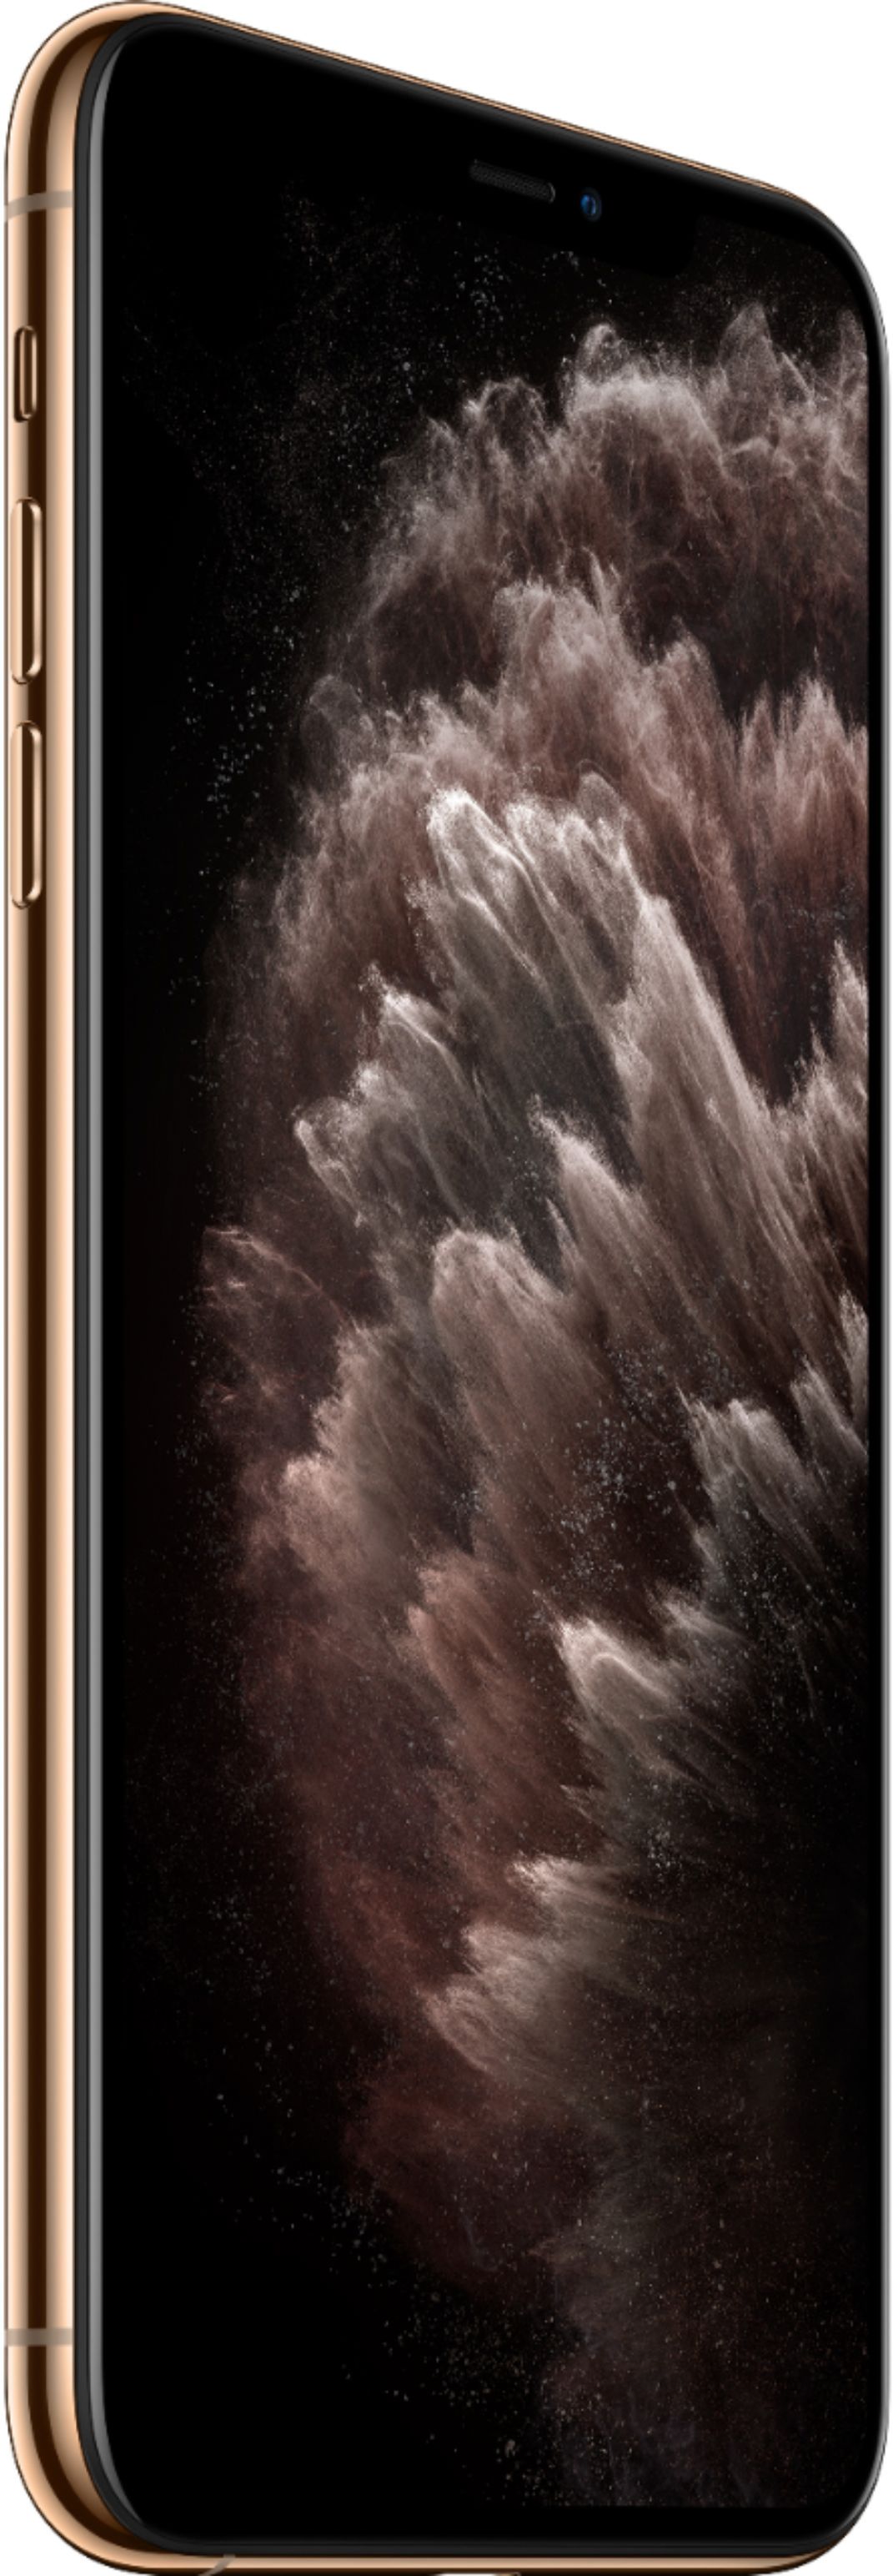 Best Buy: Apple iPhone 11 Pro Max 64GB Gold (Sprint) MWH12LL/A